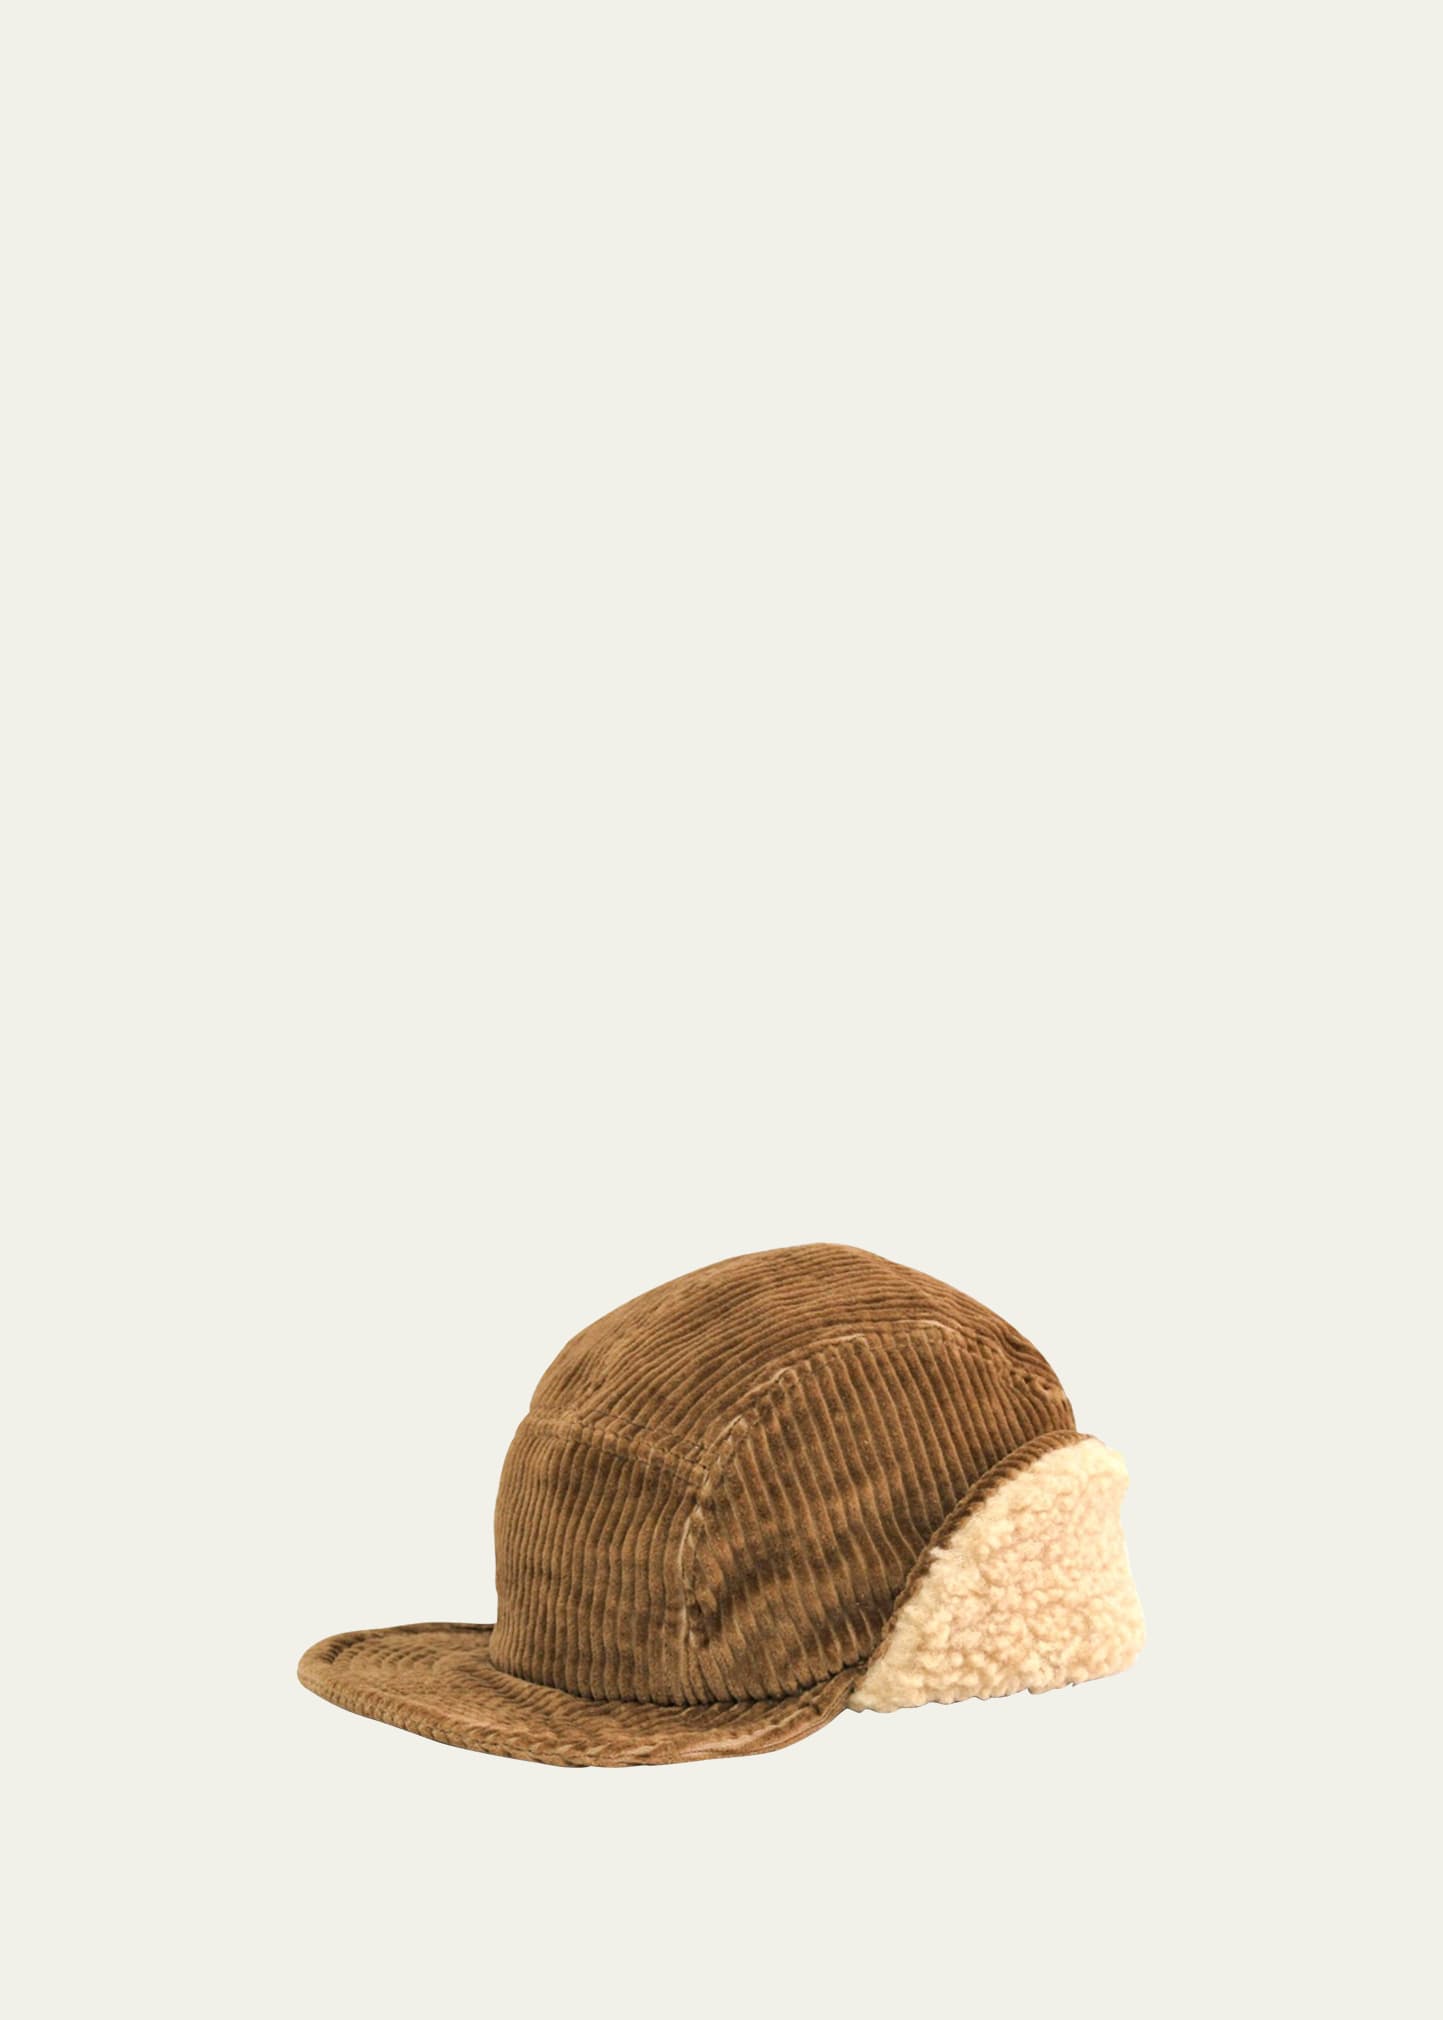 Cableami Men's Corduroy Cap With Fold-down Ear Warmers In Camel